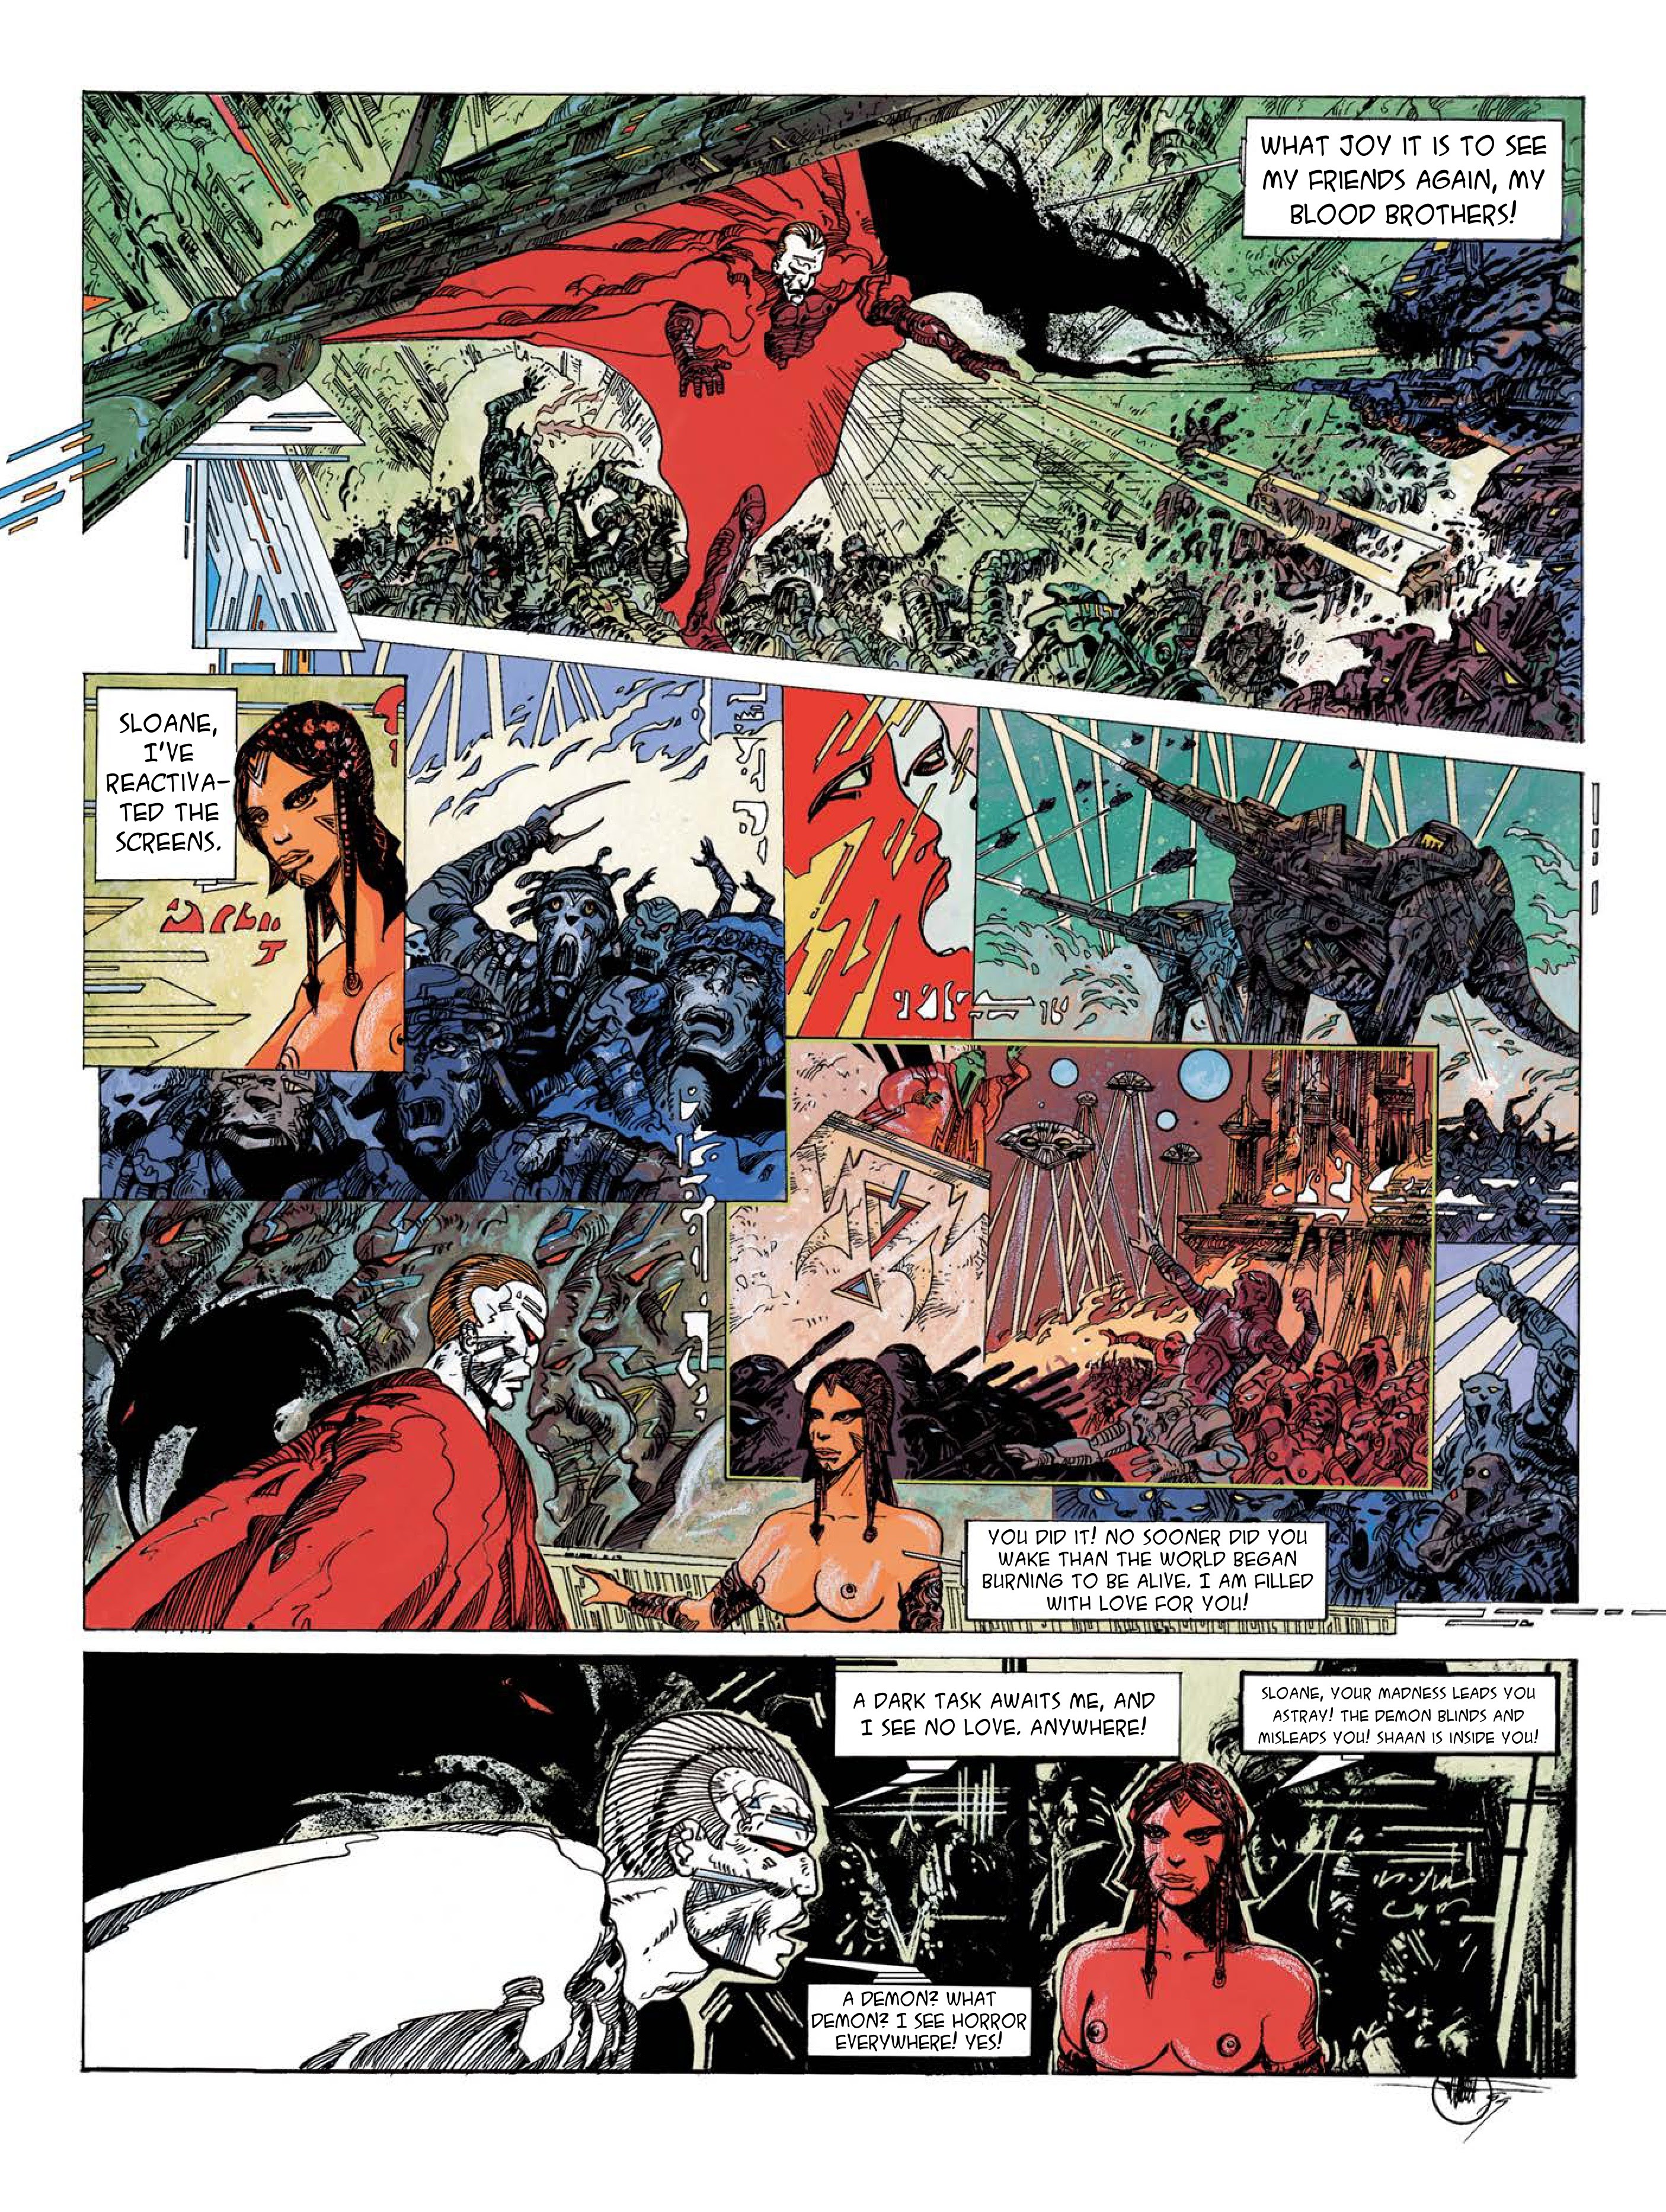 Read online Lone Sloane: Chaos comic -  Issue # Full - 36